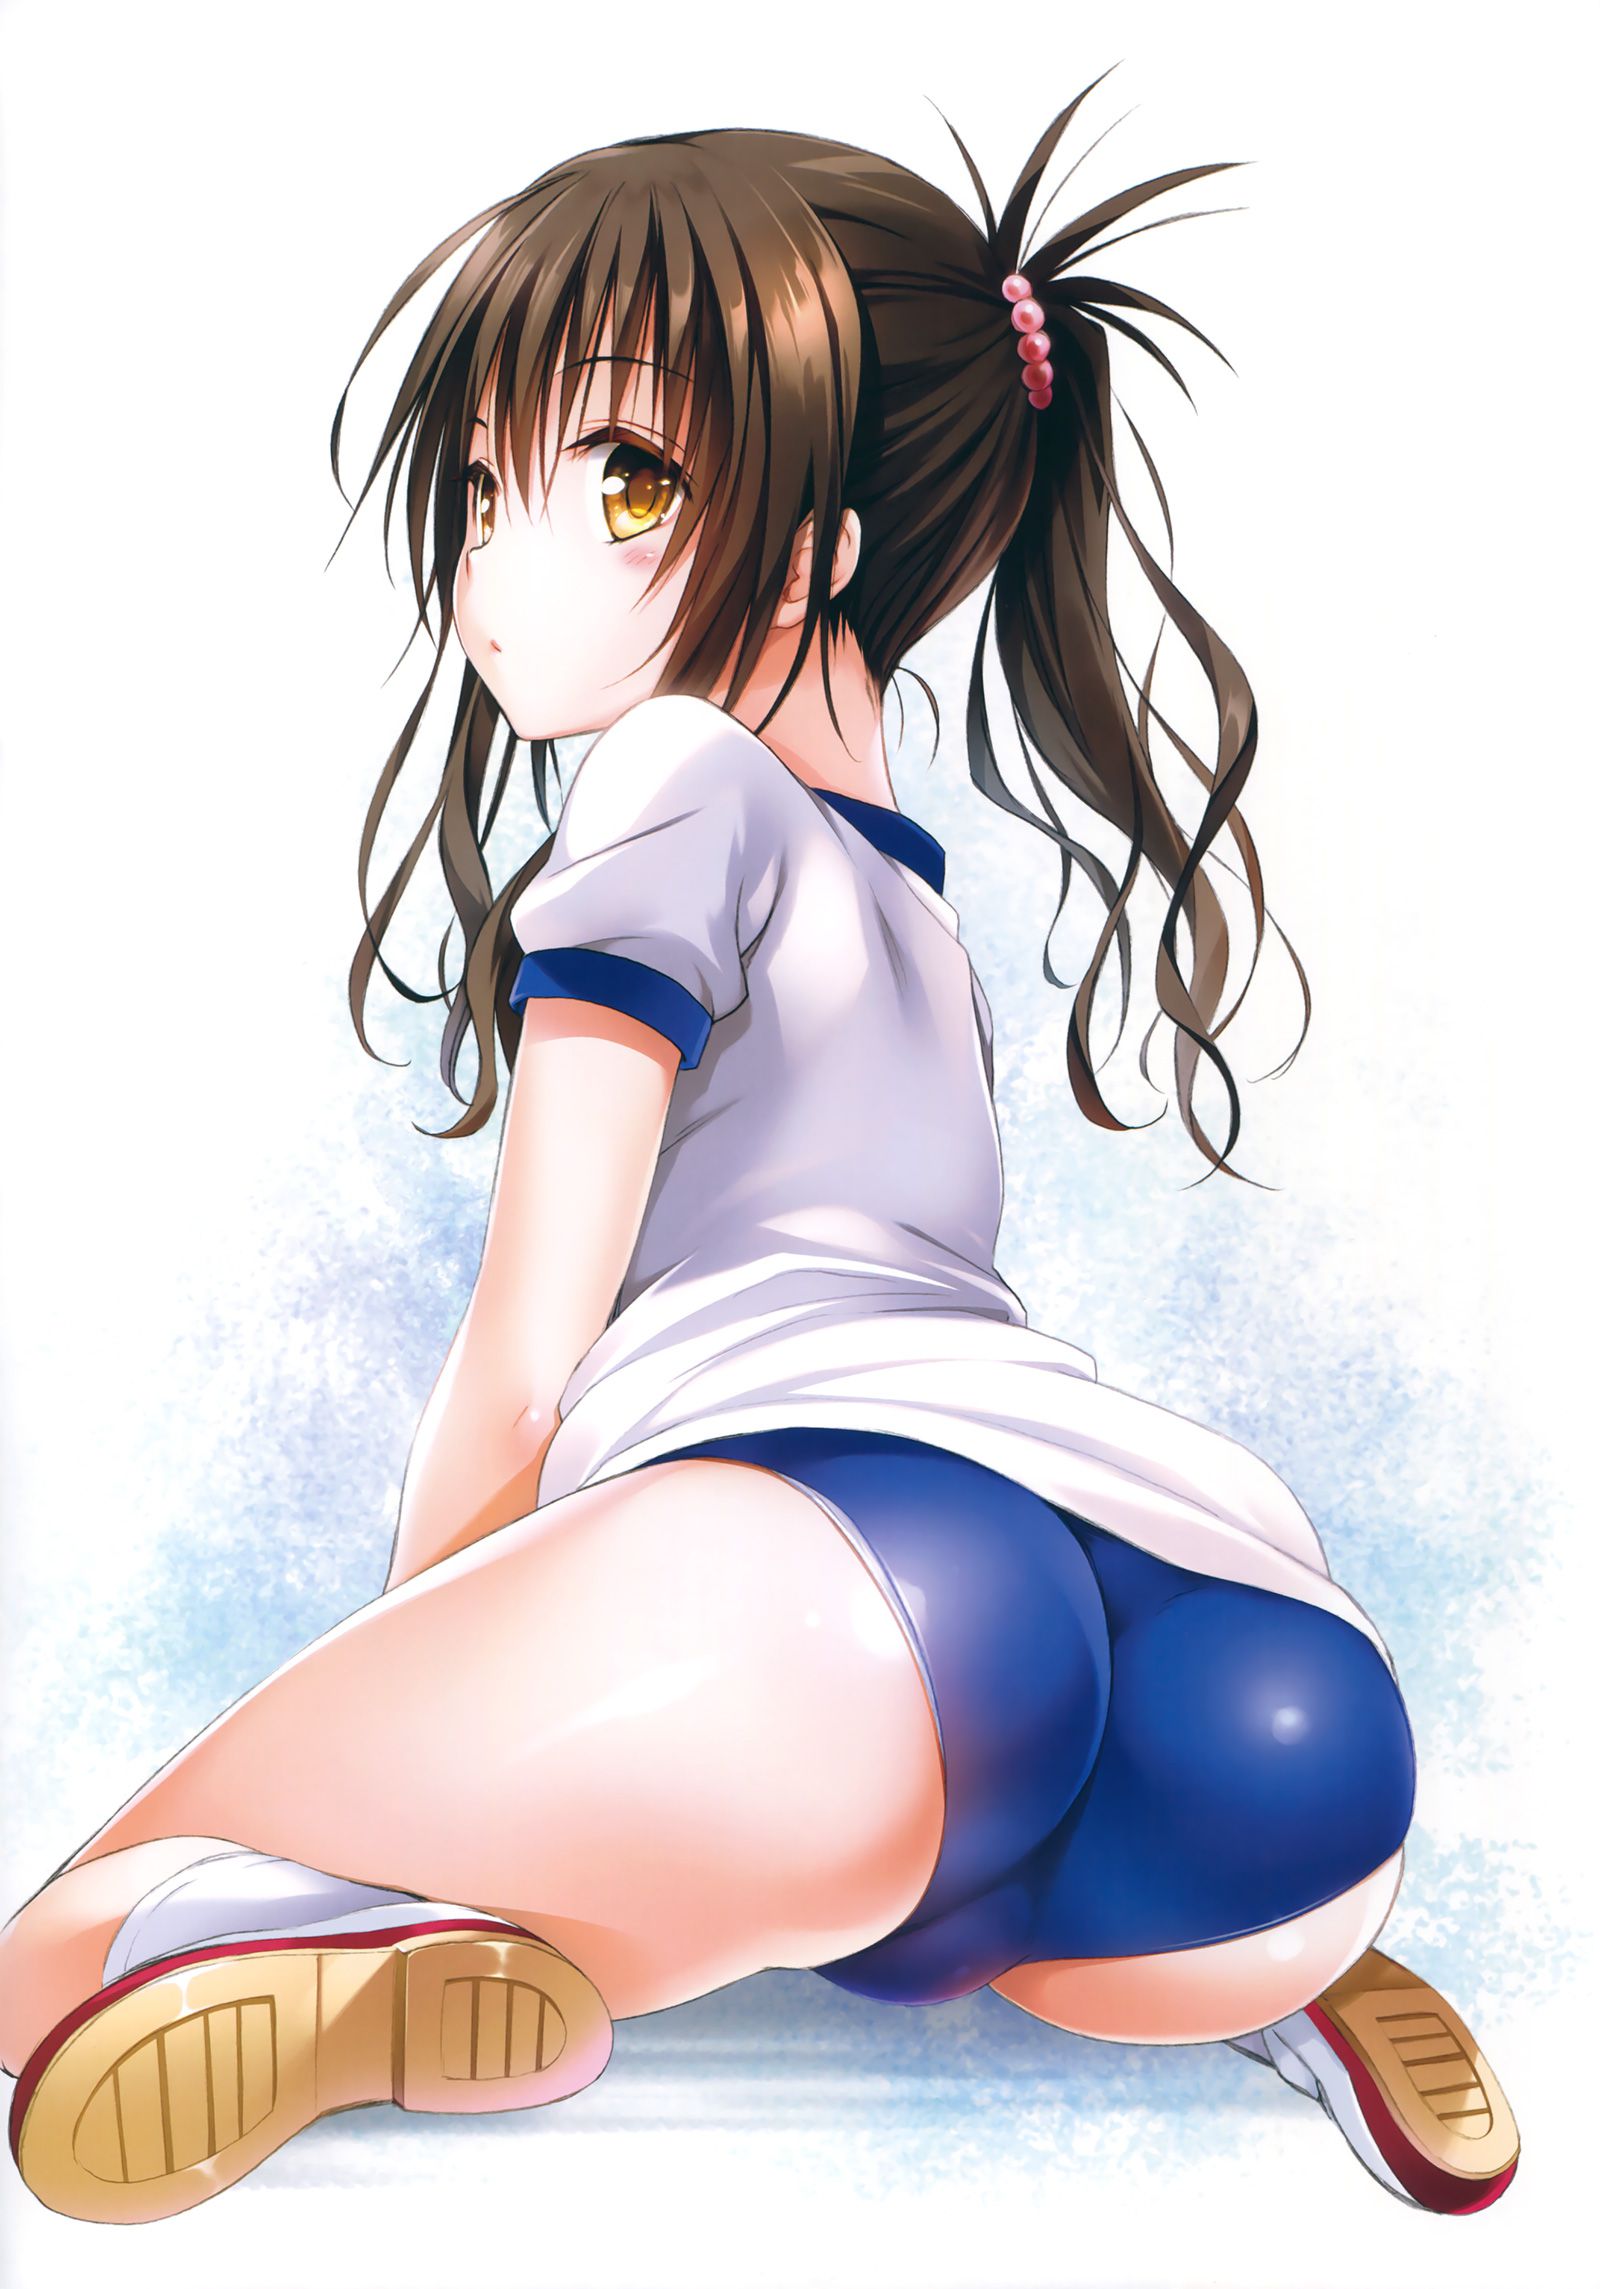 [some senses of incongruity] the second eroticism image which wear the top though is bloomers, a gym suit, and wear 11